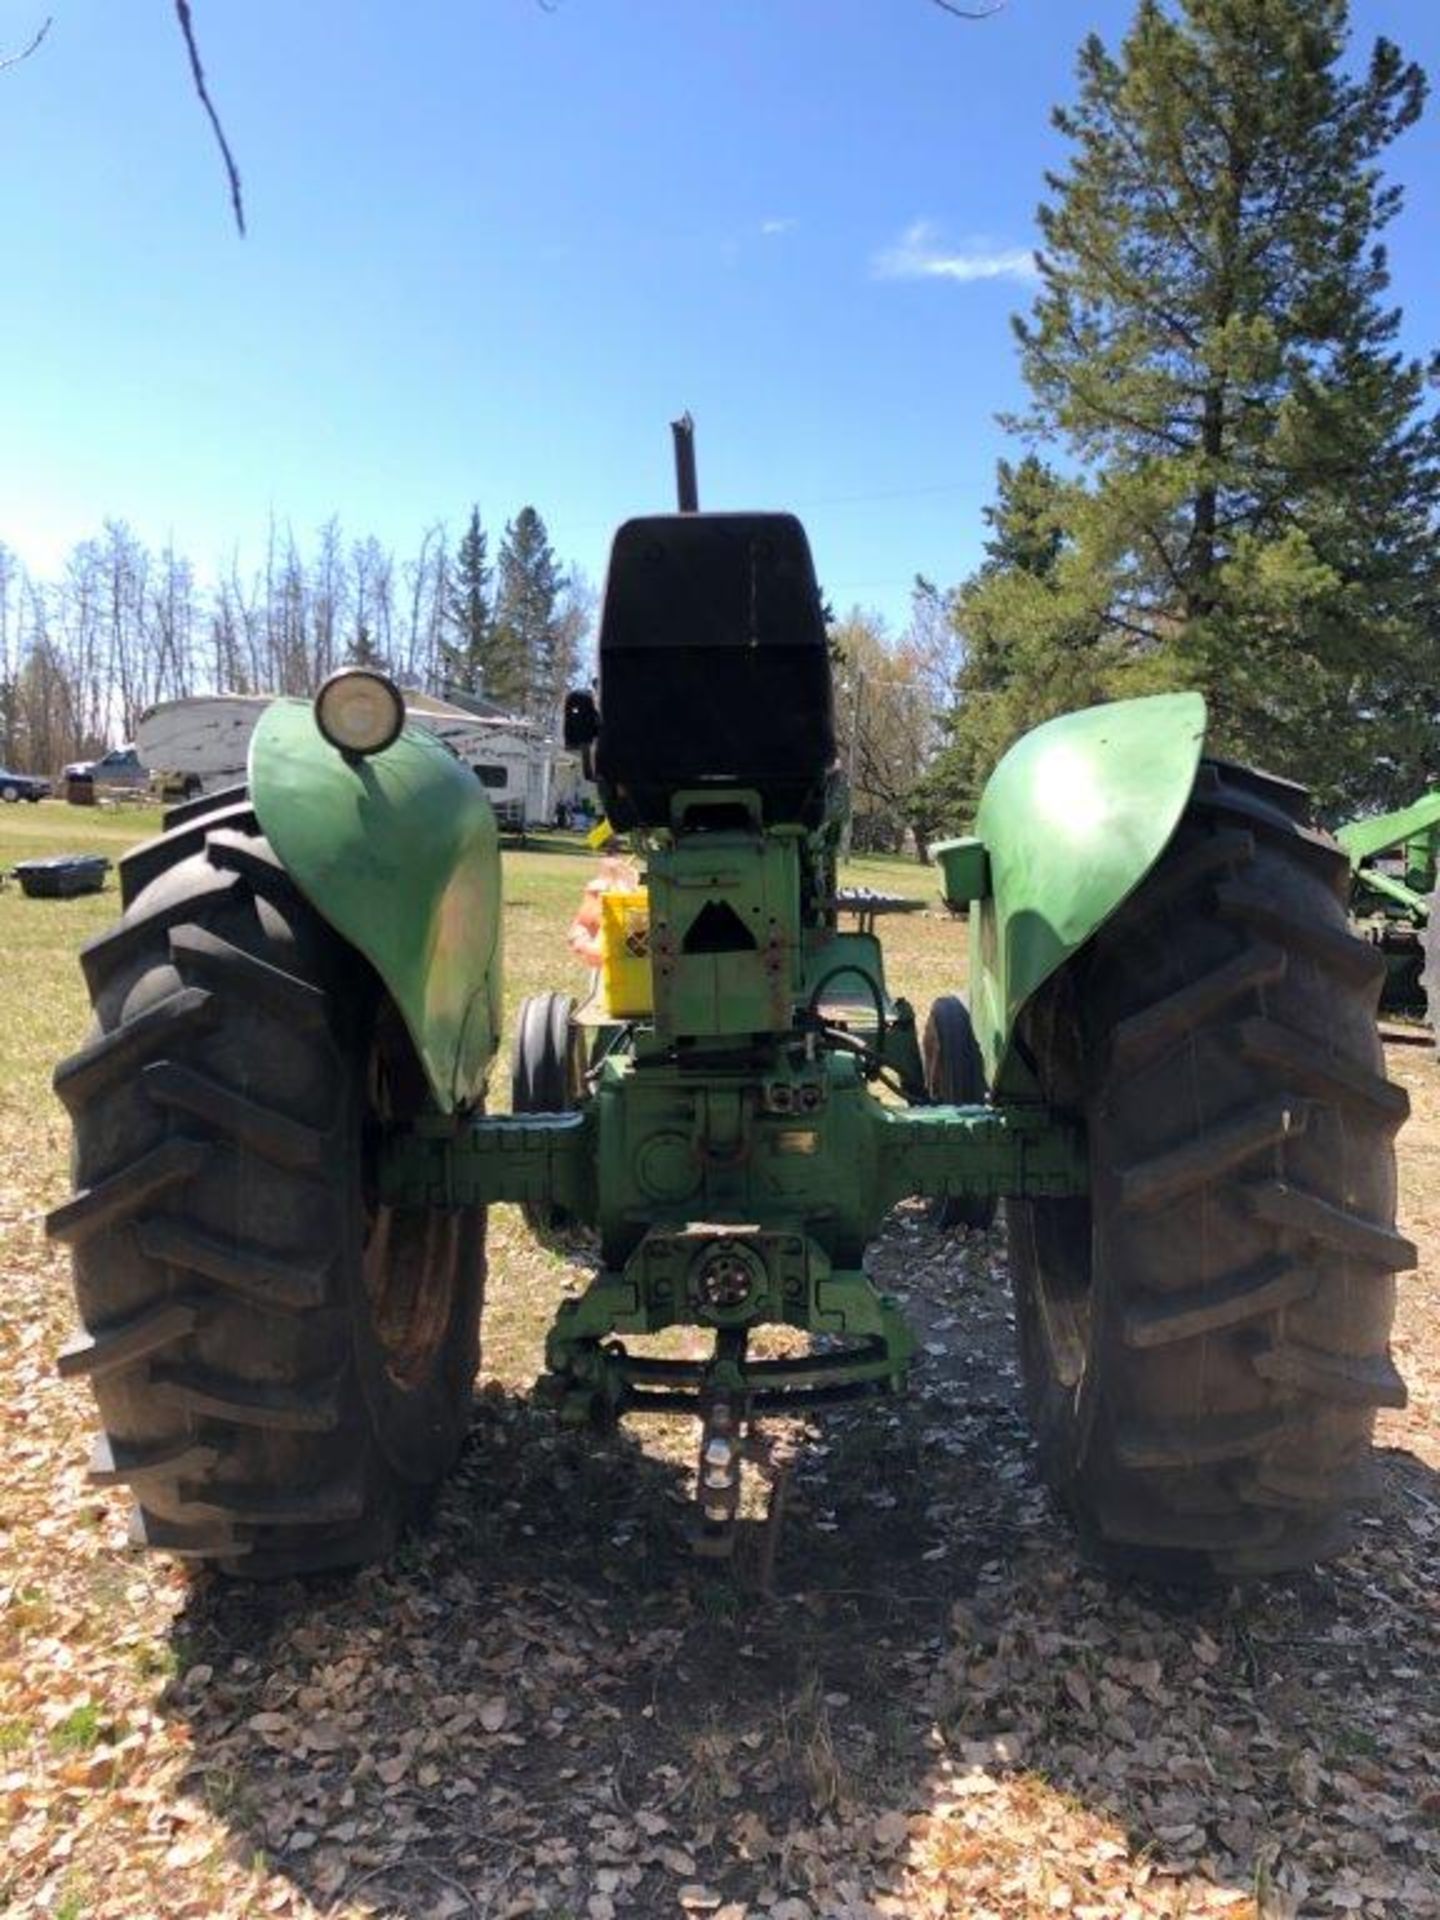 JOHN DEERE 4010 TRACTOR, DIESEL, 2WD, 18.4-34 R1 RUBBER (GOOD CONDITION), 540 PTO, S/N 401022T3600 - Image 8 of 14